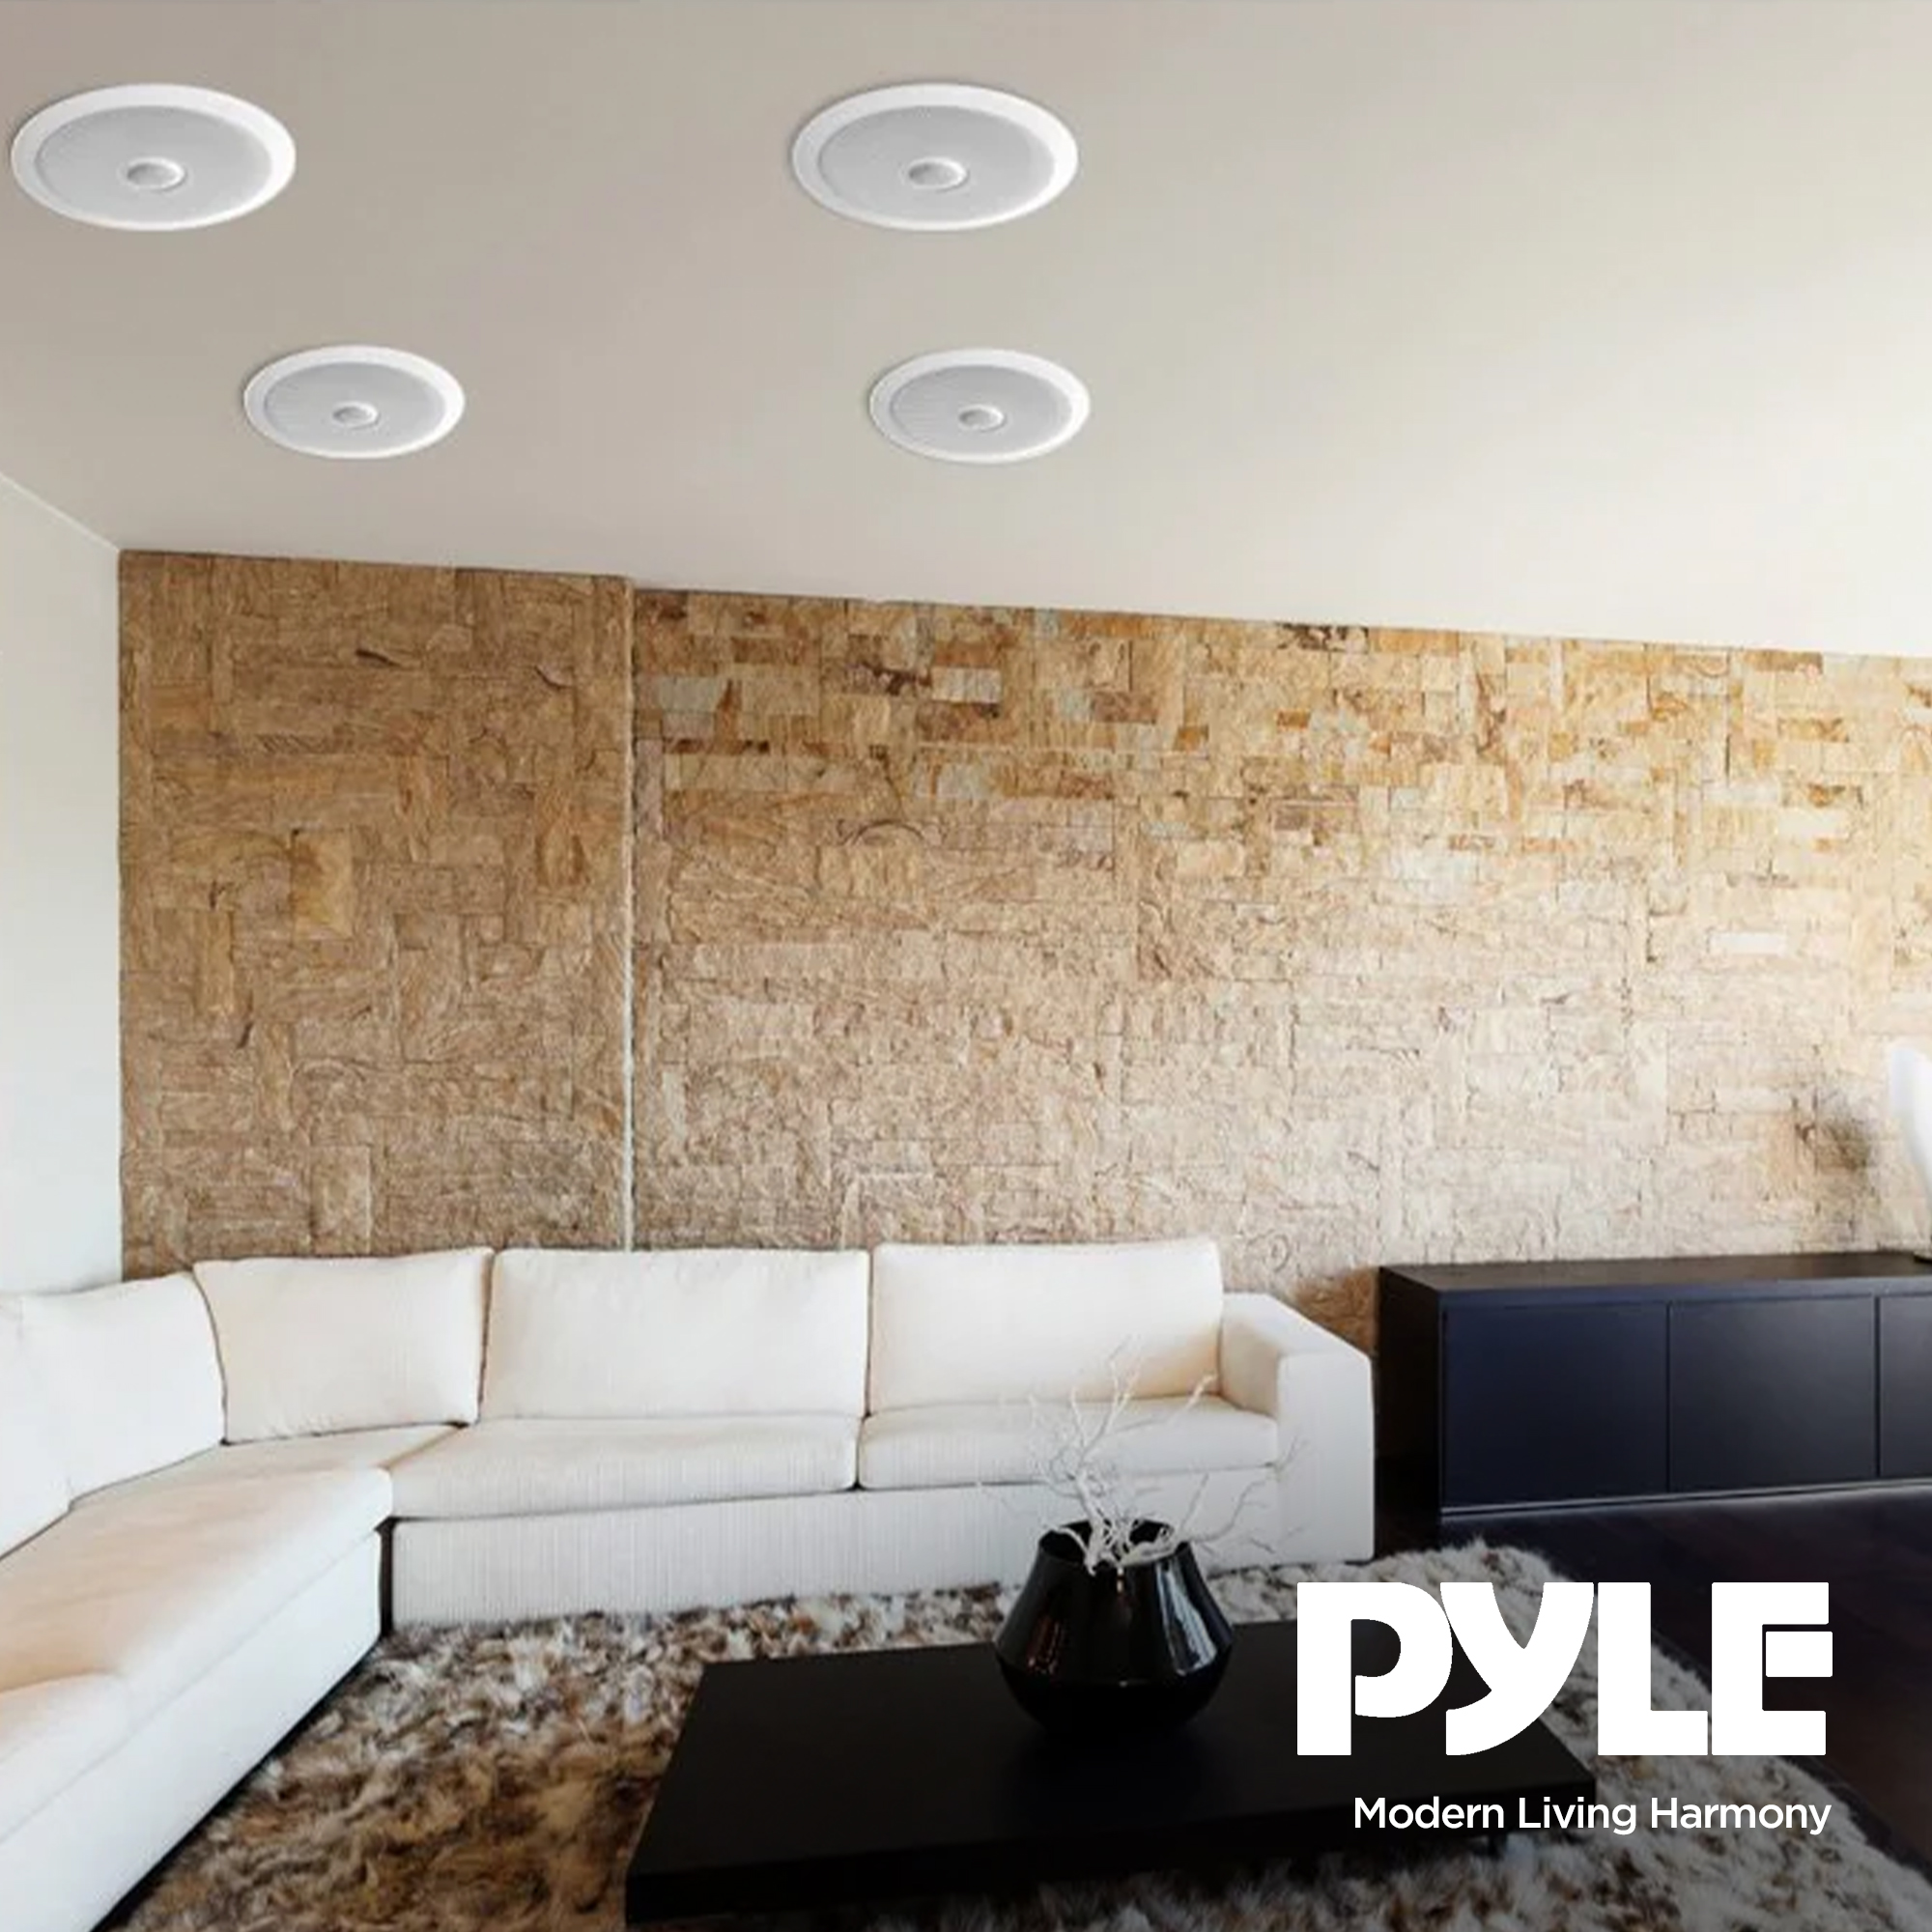 Pyle 8 Inch 2 Way In Wall Ceiling Home Speakers System Audio Stereo, 6 Speakers - image 5 of 11